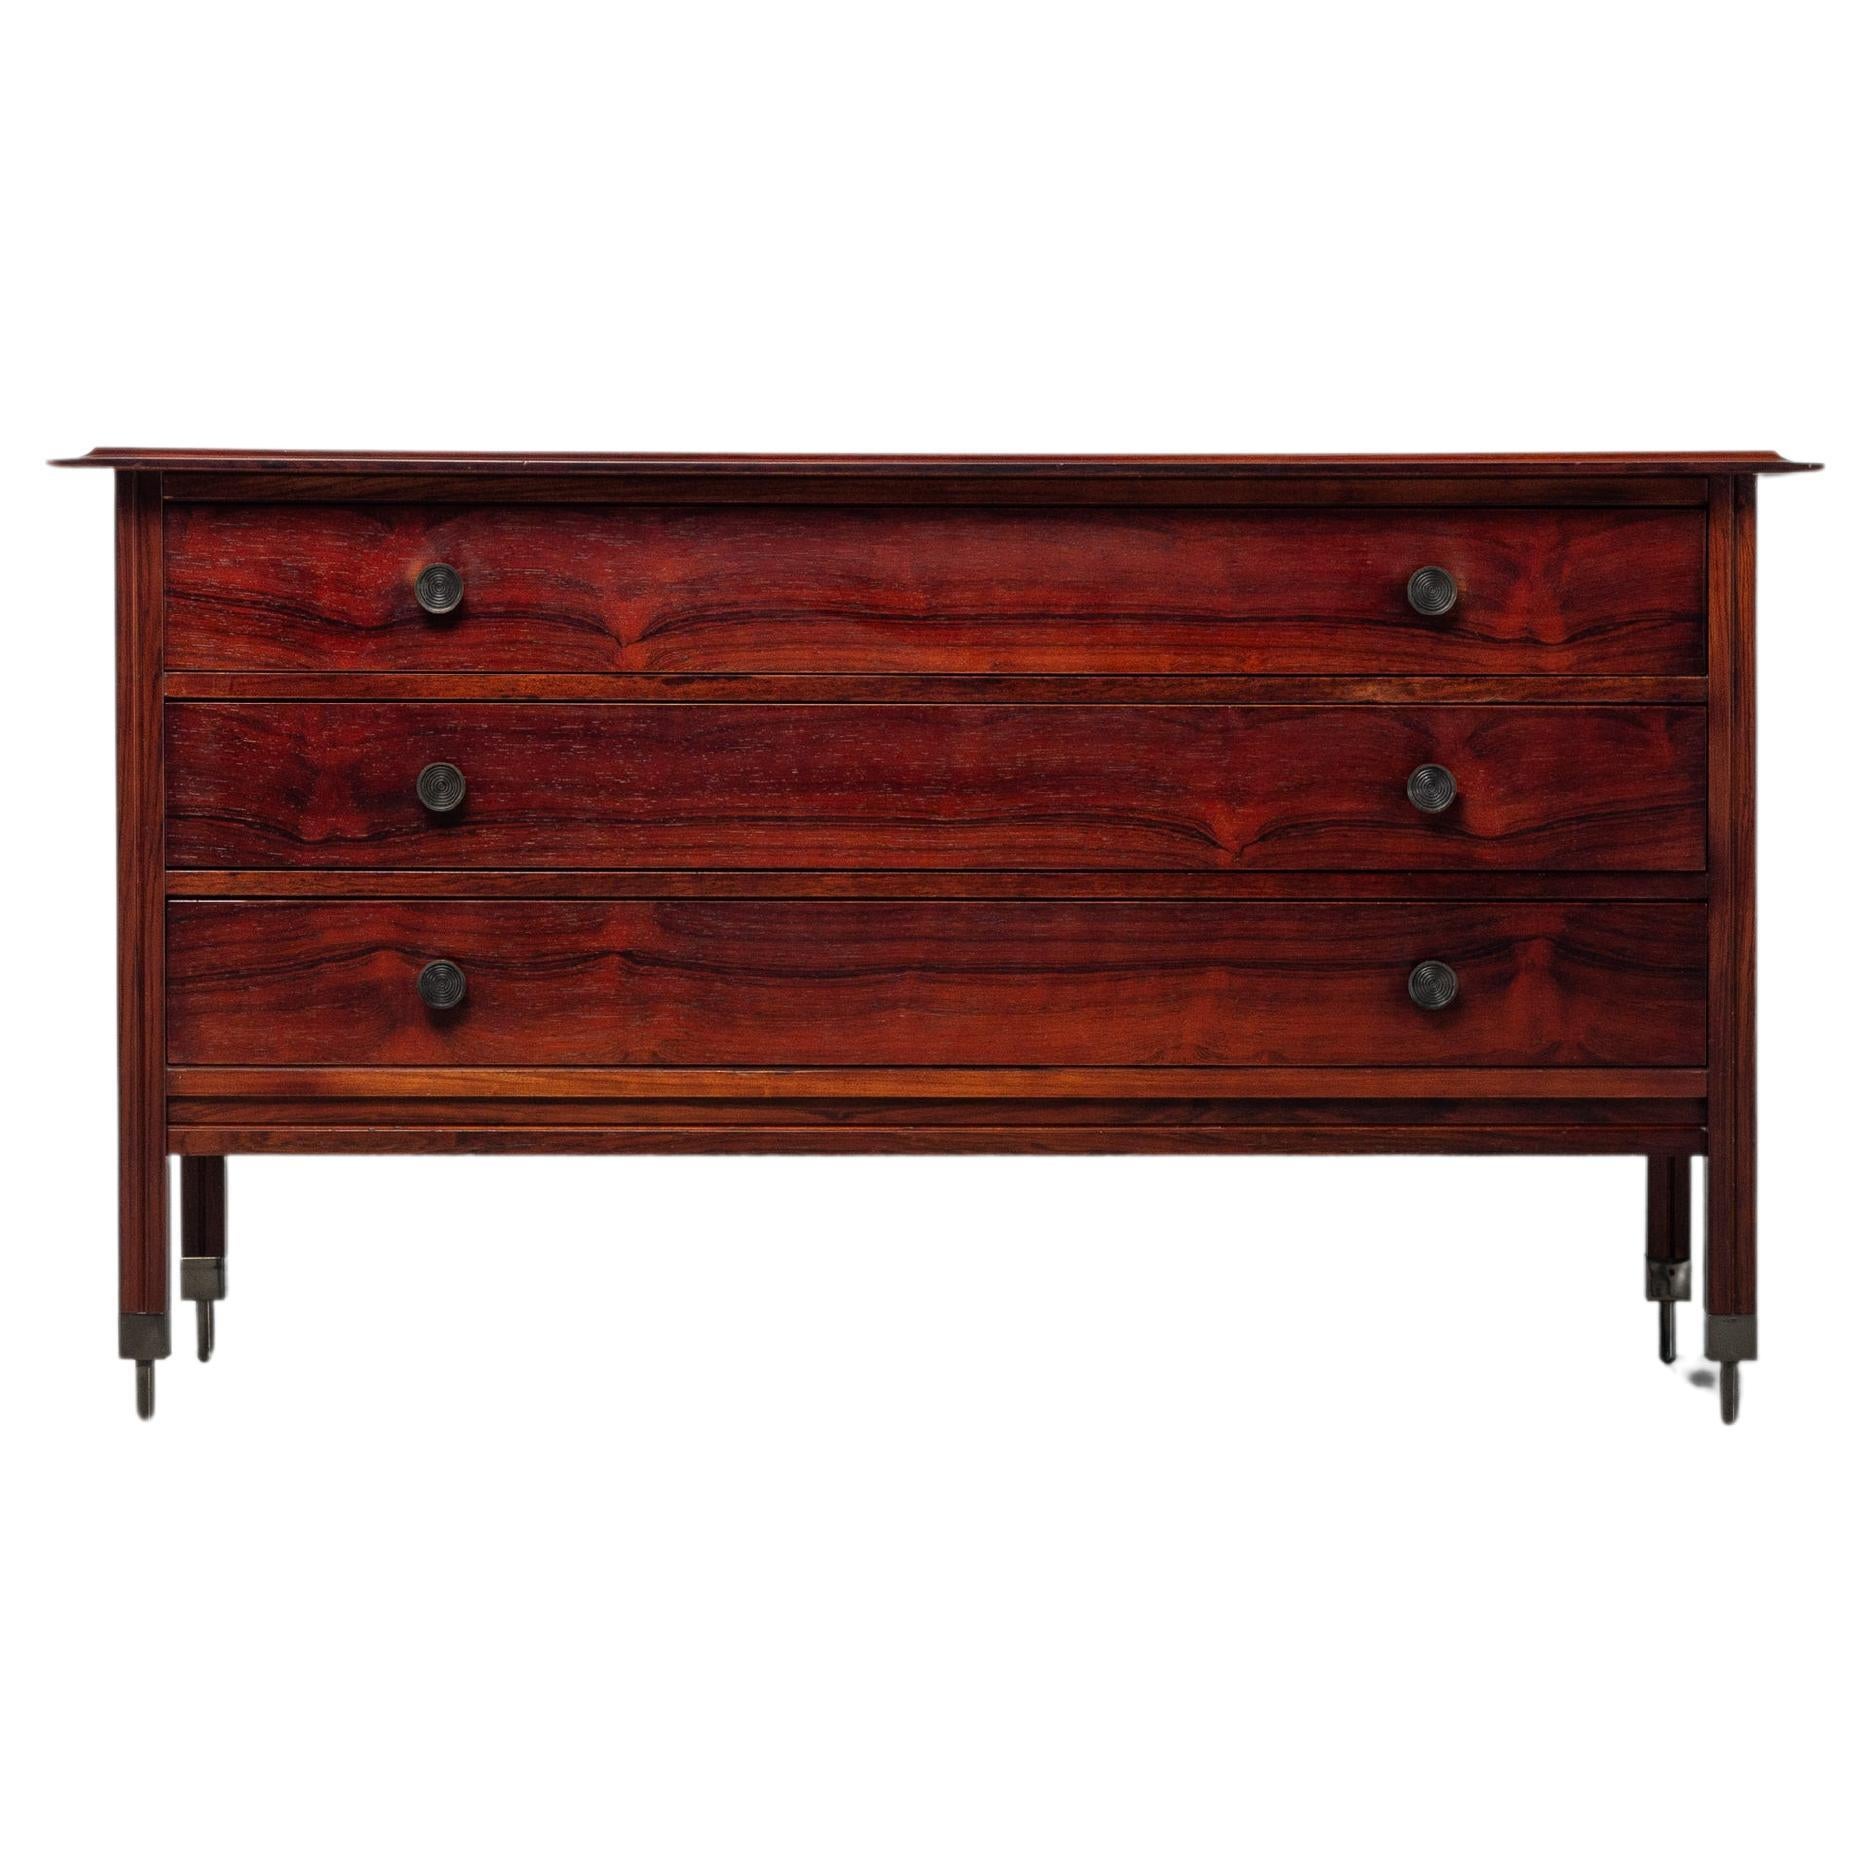 Carlo de Carli DC154 chest of drawers Sormani Italy 1963 For Sale